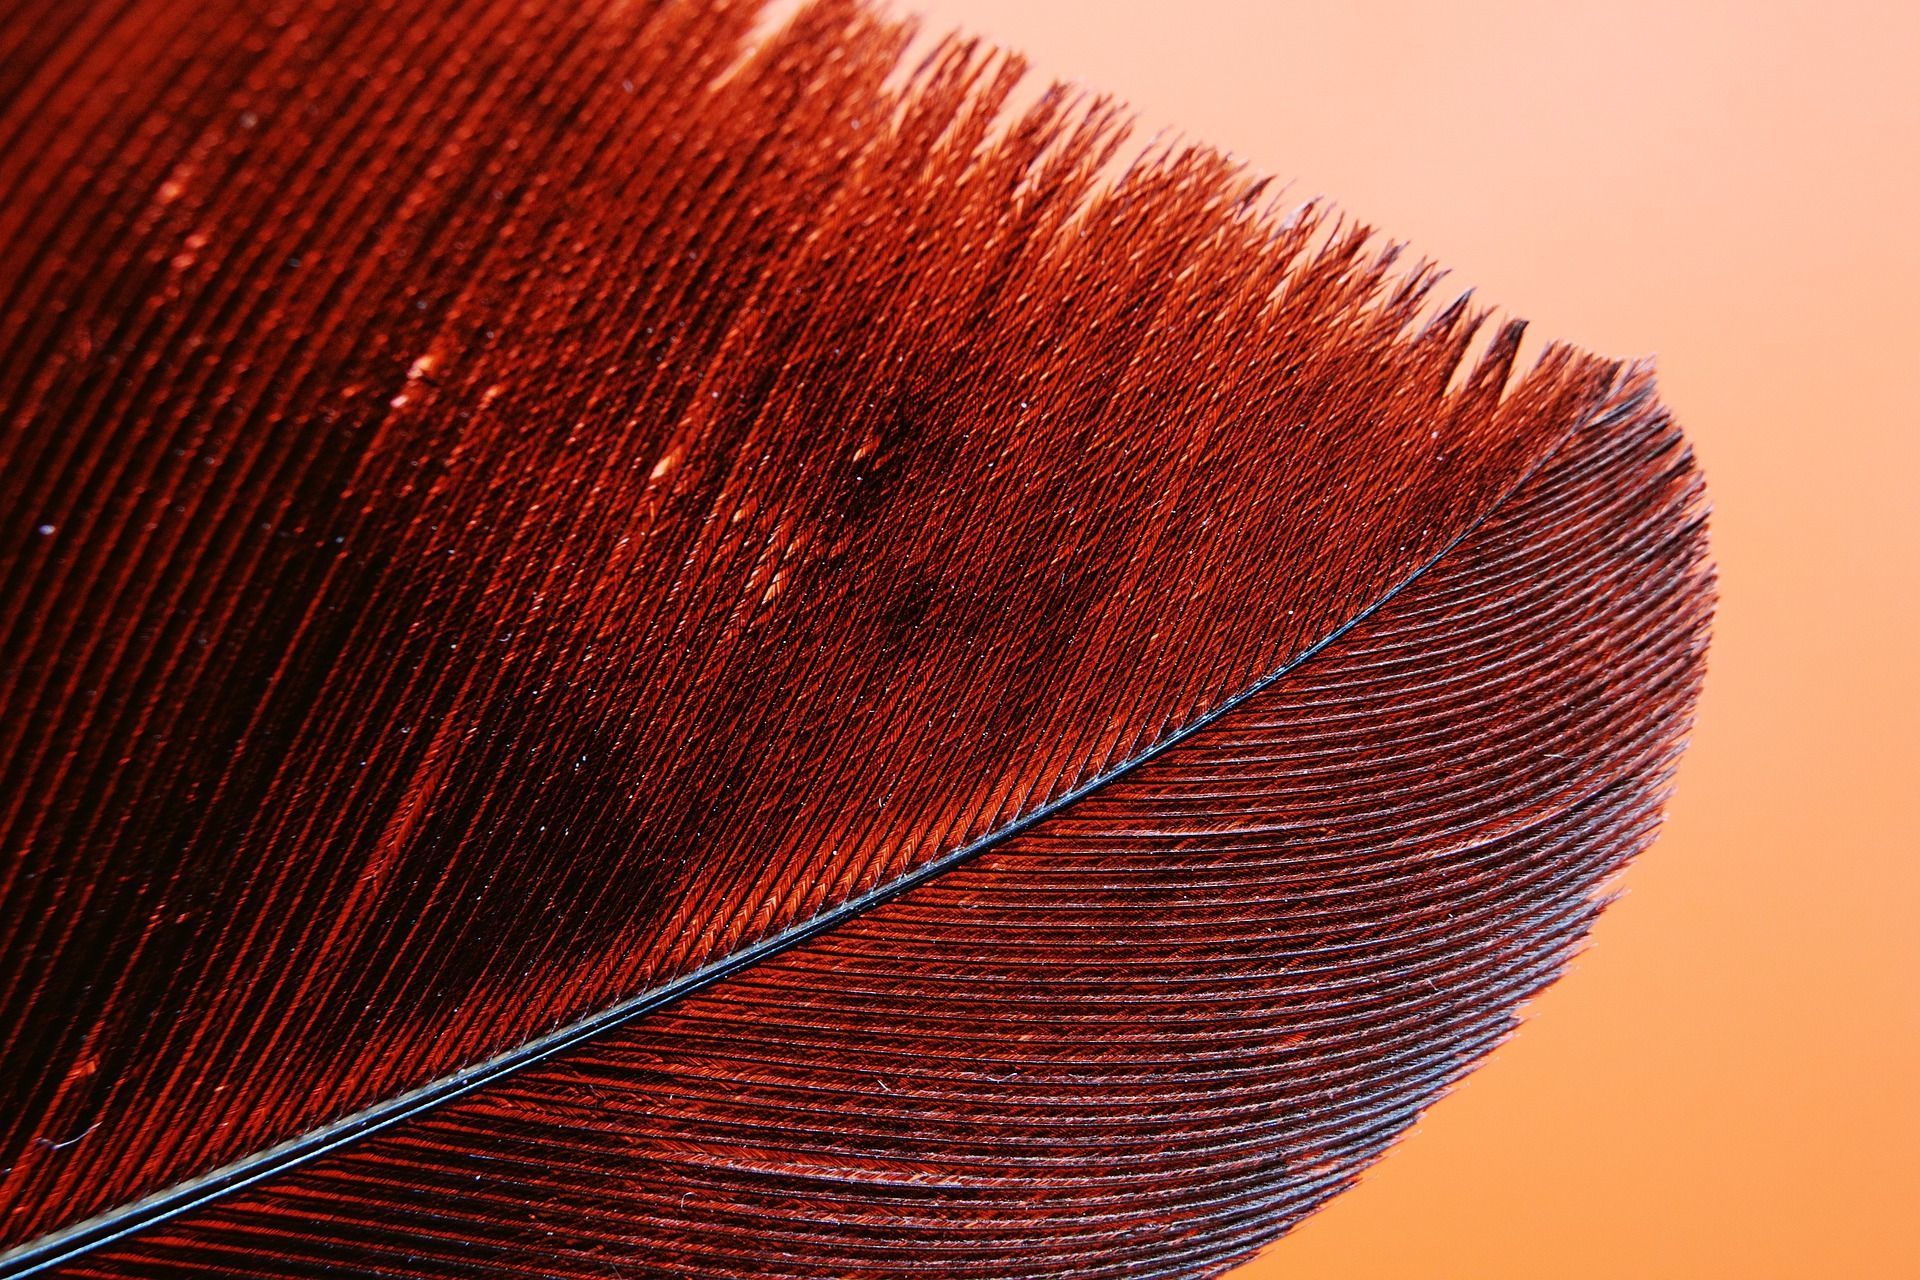 Close-up image of the tip of a red feather.